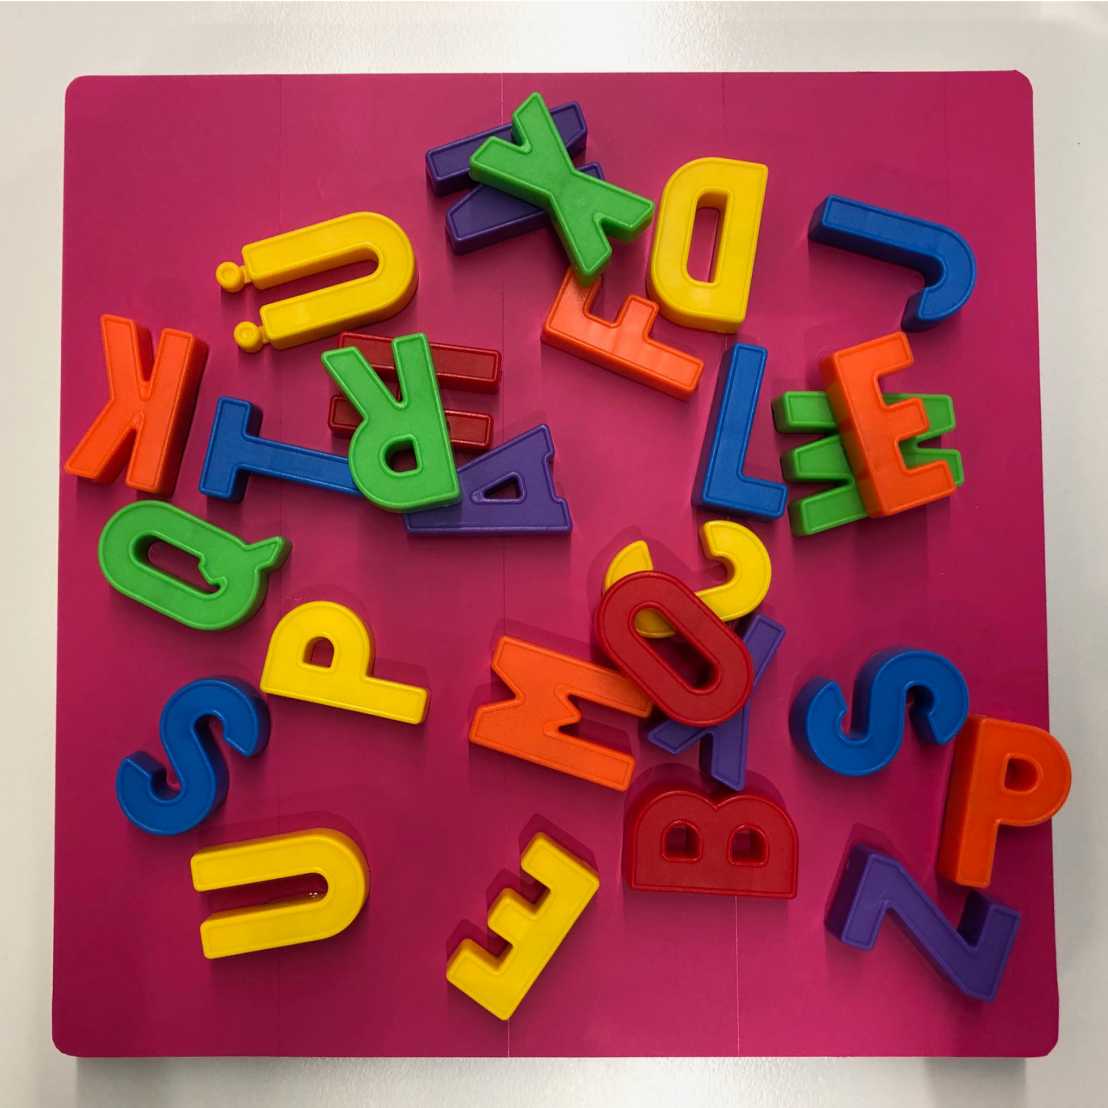 colourful and jumbled letters made of plastic